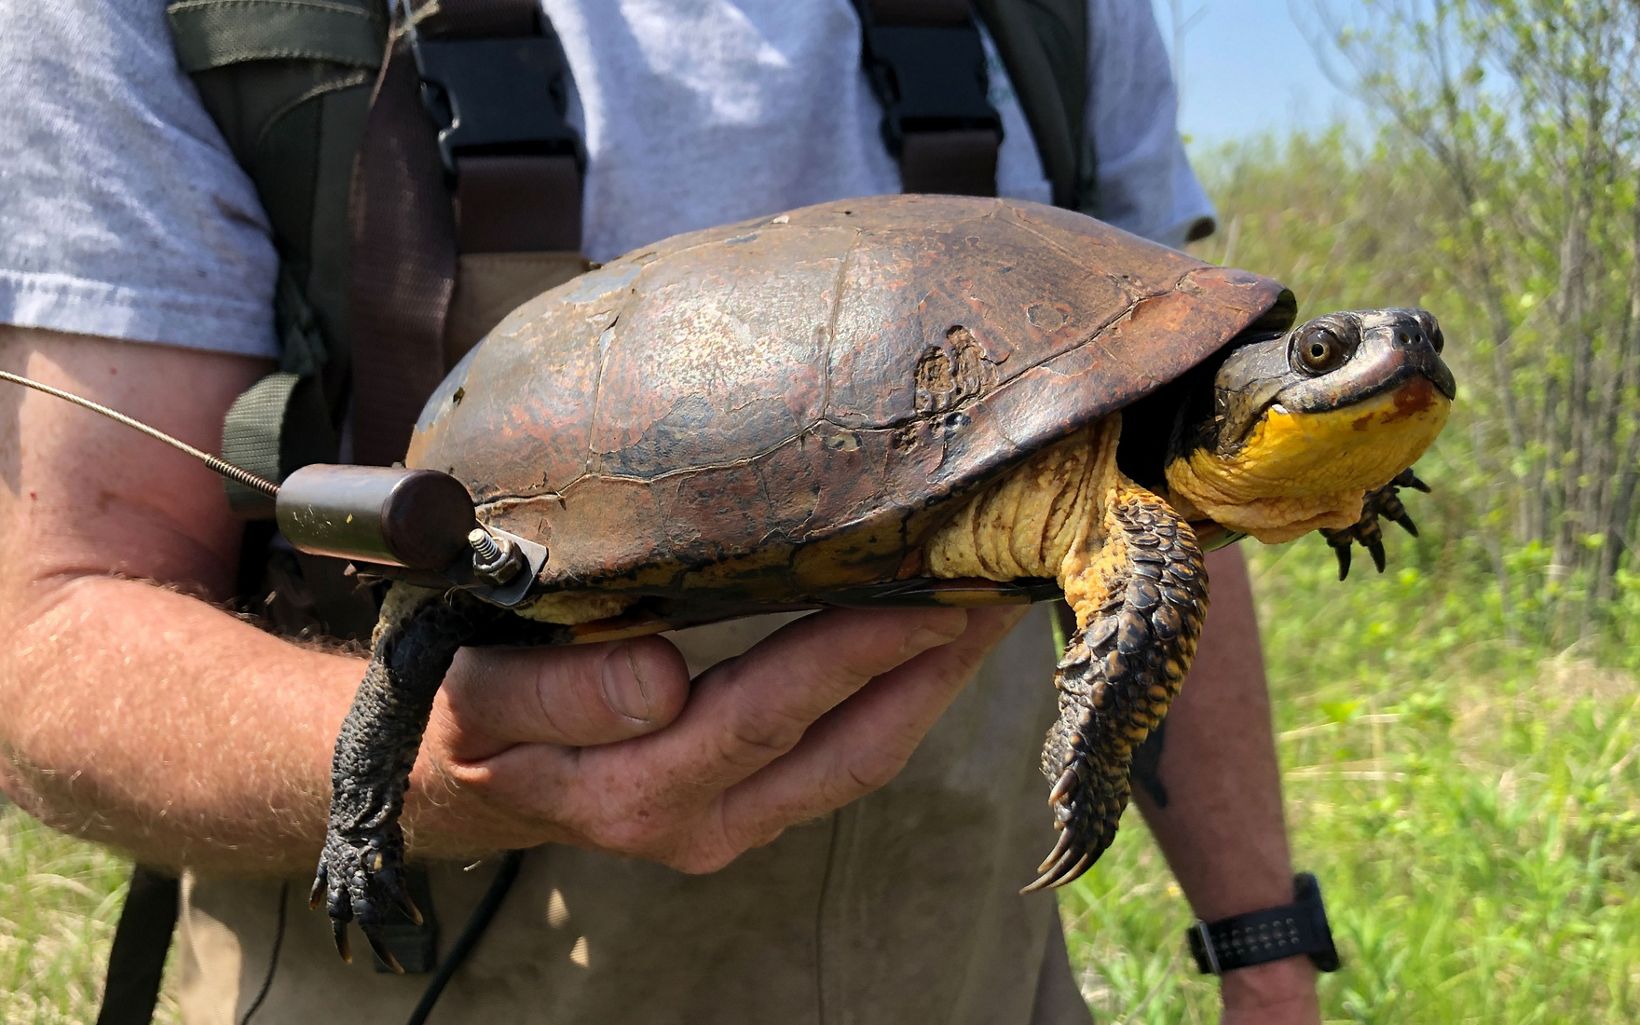 This female Blanding’s turtle “Zelda” carries a tracking device as part of a research project to learn more about her species’ habitat needs.